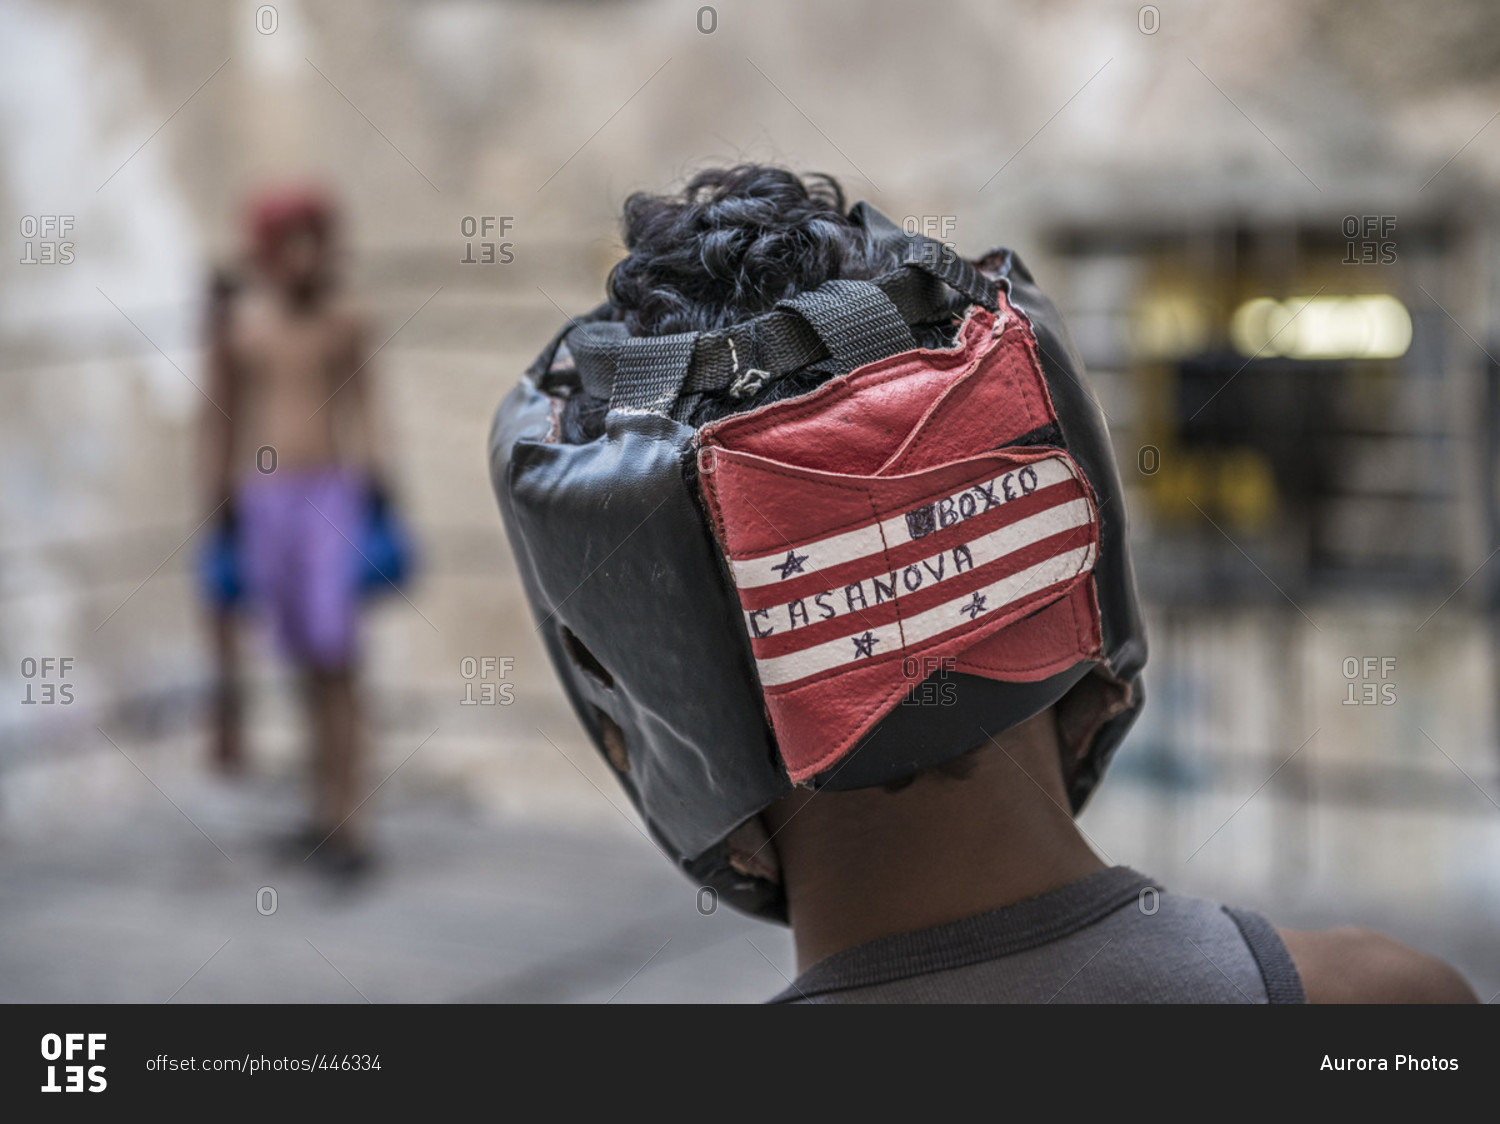 Old Havana, La Habana, Cuba - April 24, 2014: Close-up of a
the head and headgear of a young Cuban boy as he prepares to spar
with his opponent seen in the background at Project Cuba Boxeo, an
aid project from Malaika Aid for Children, the creation of Sam